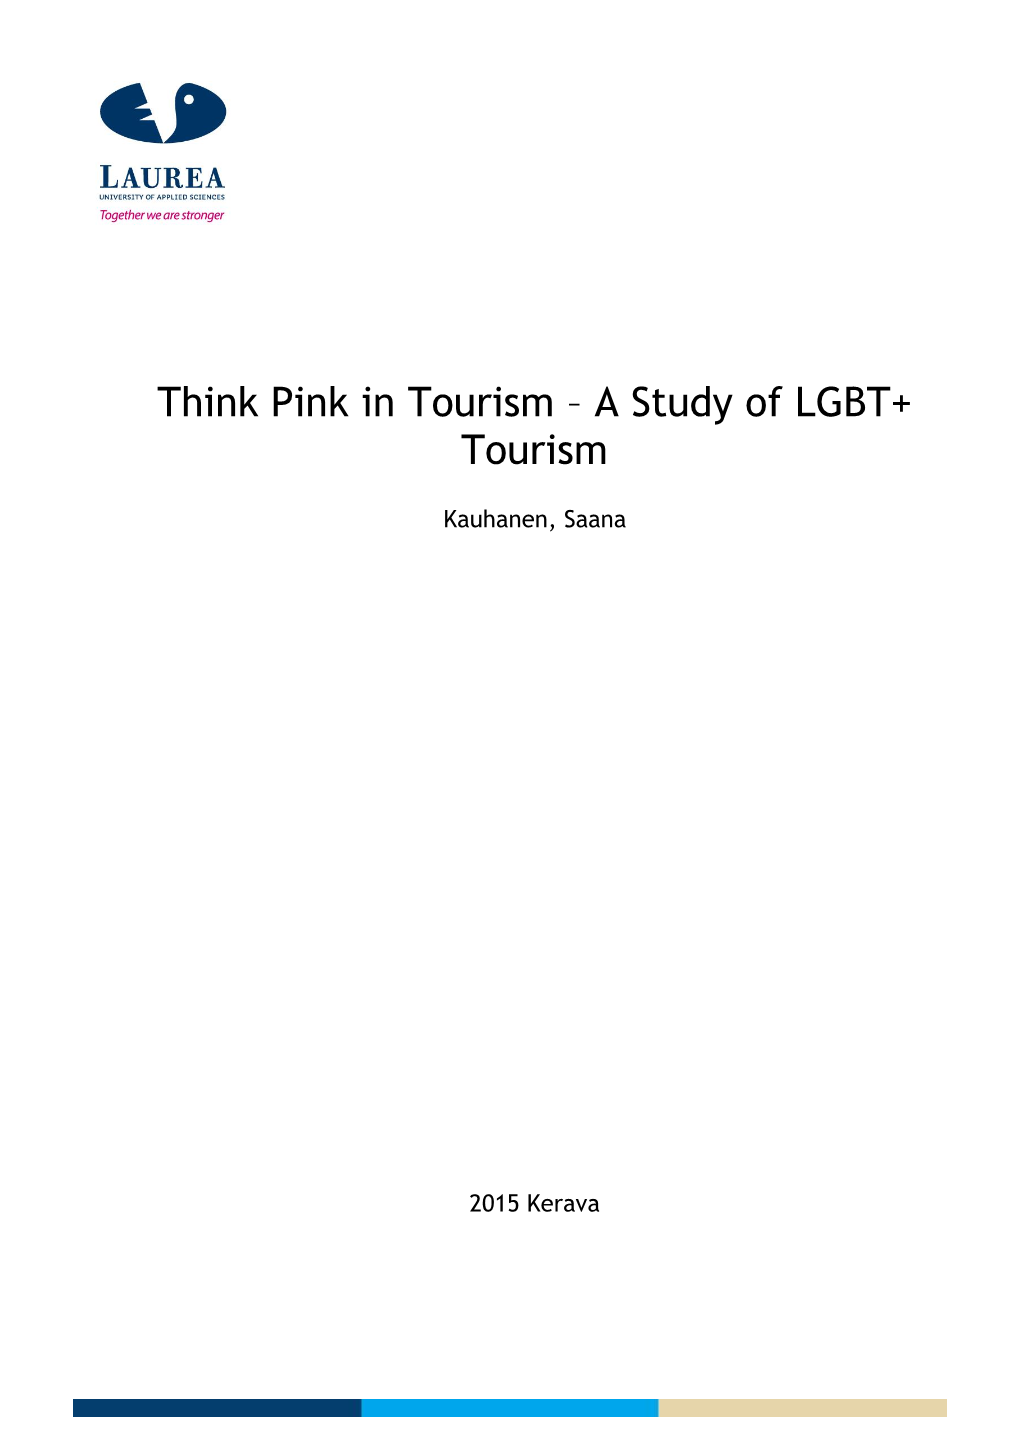 Think Pink in Tourism – a Study of LGBT+ Tourism